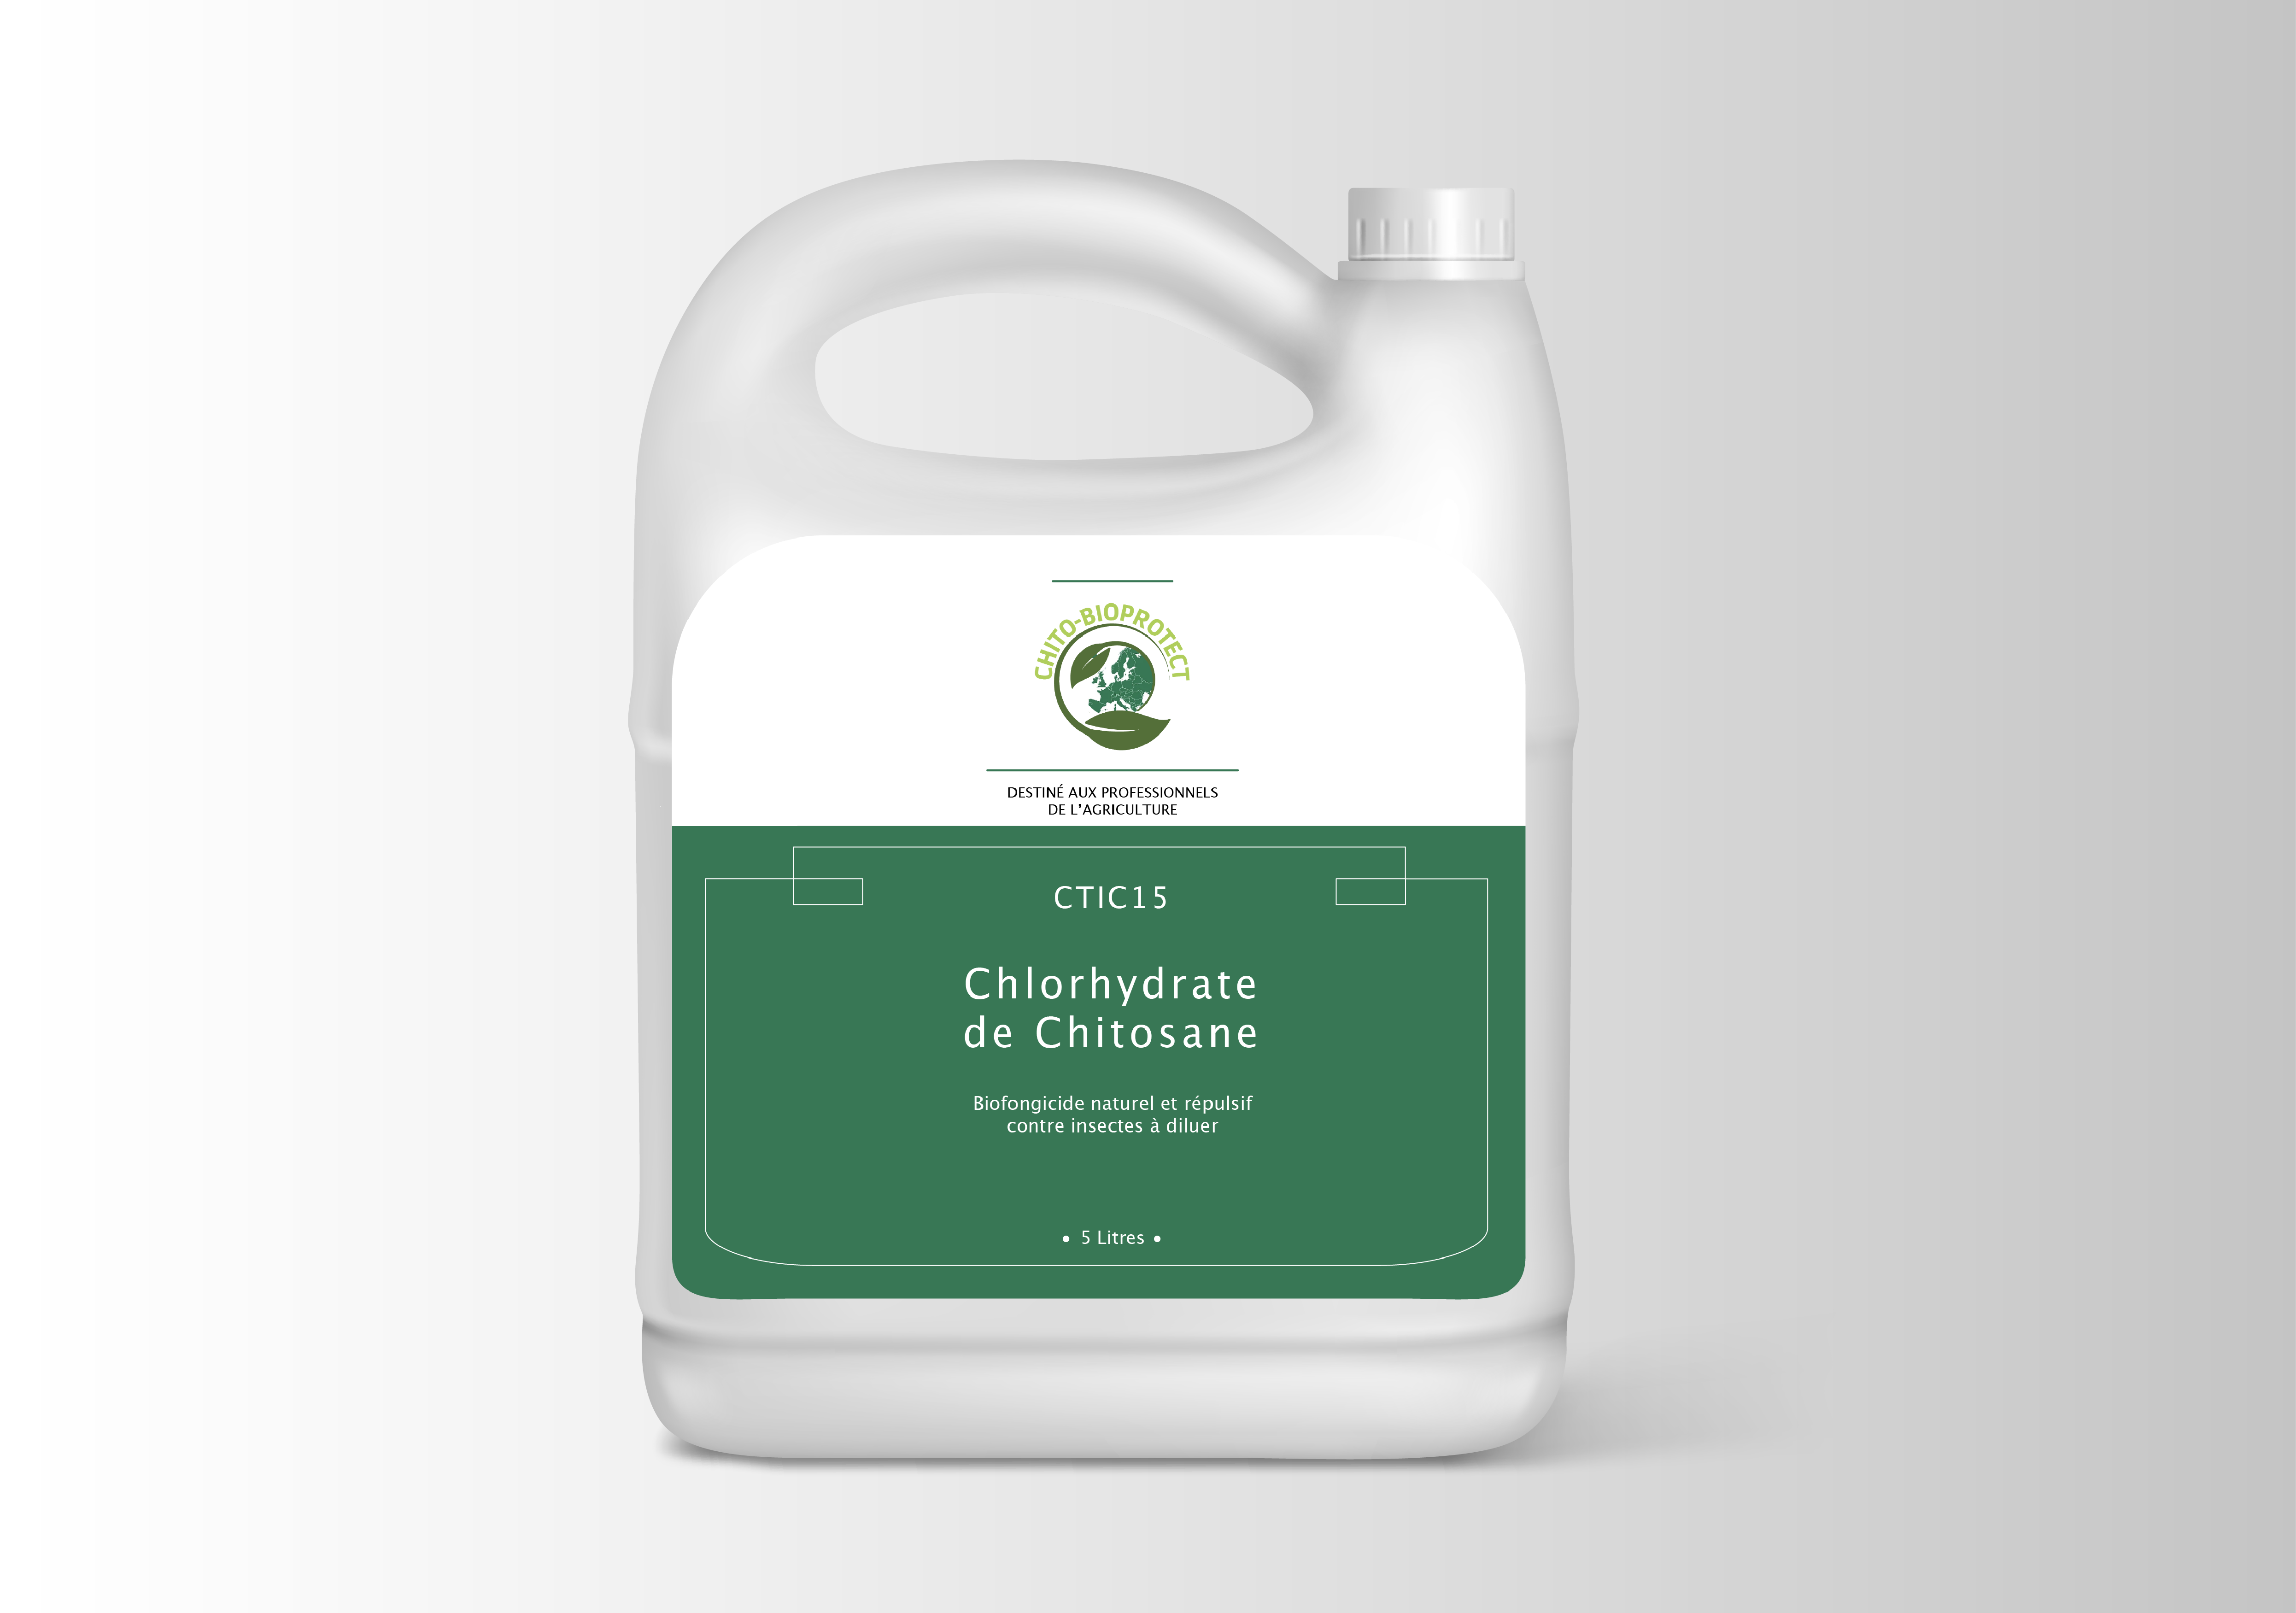 Chlorhydrate de Chitosane